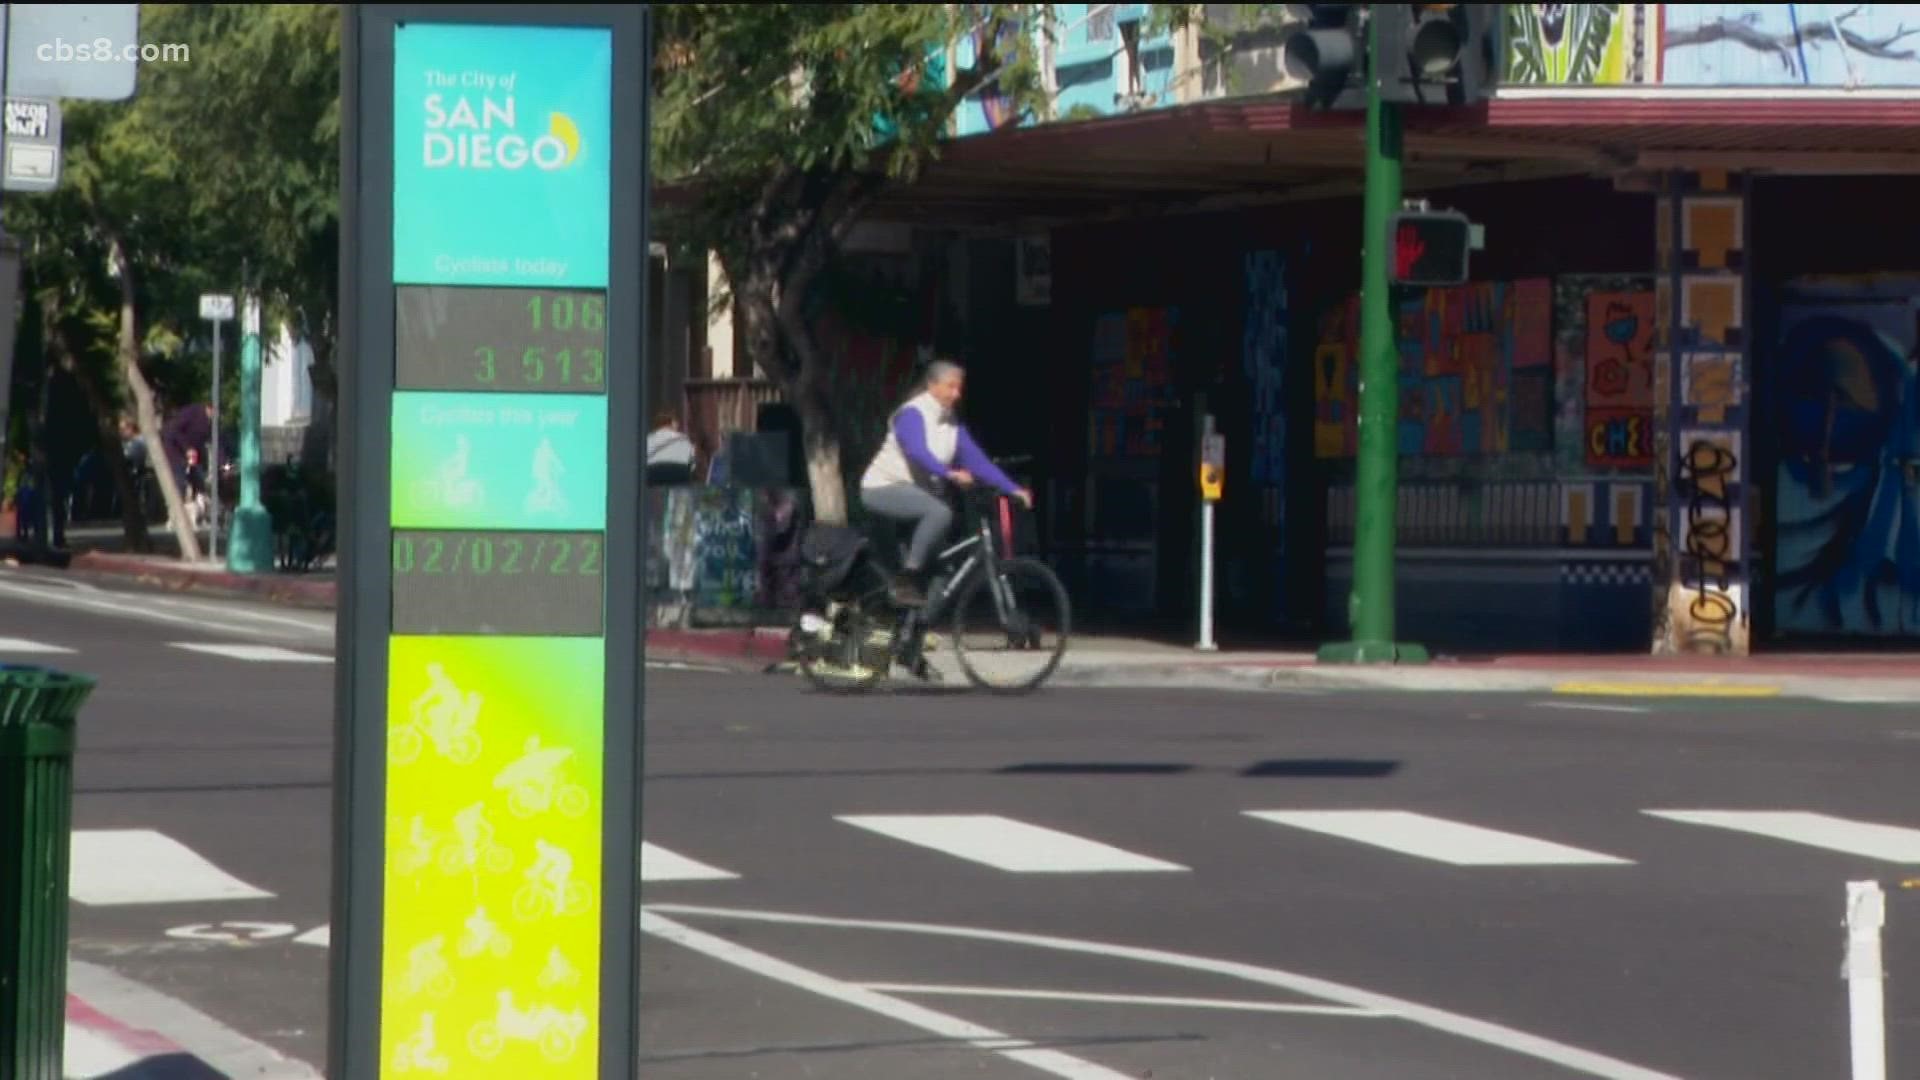 CBS 8 visited North Park to get a firsthand look at ridership in the area.